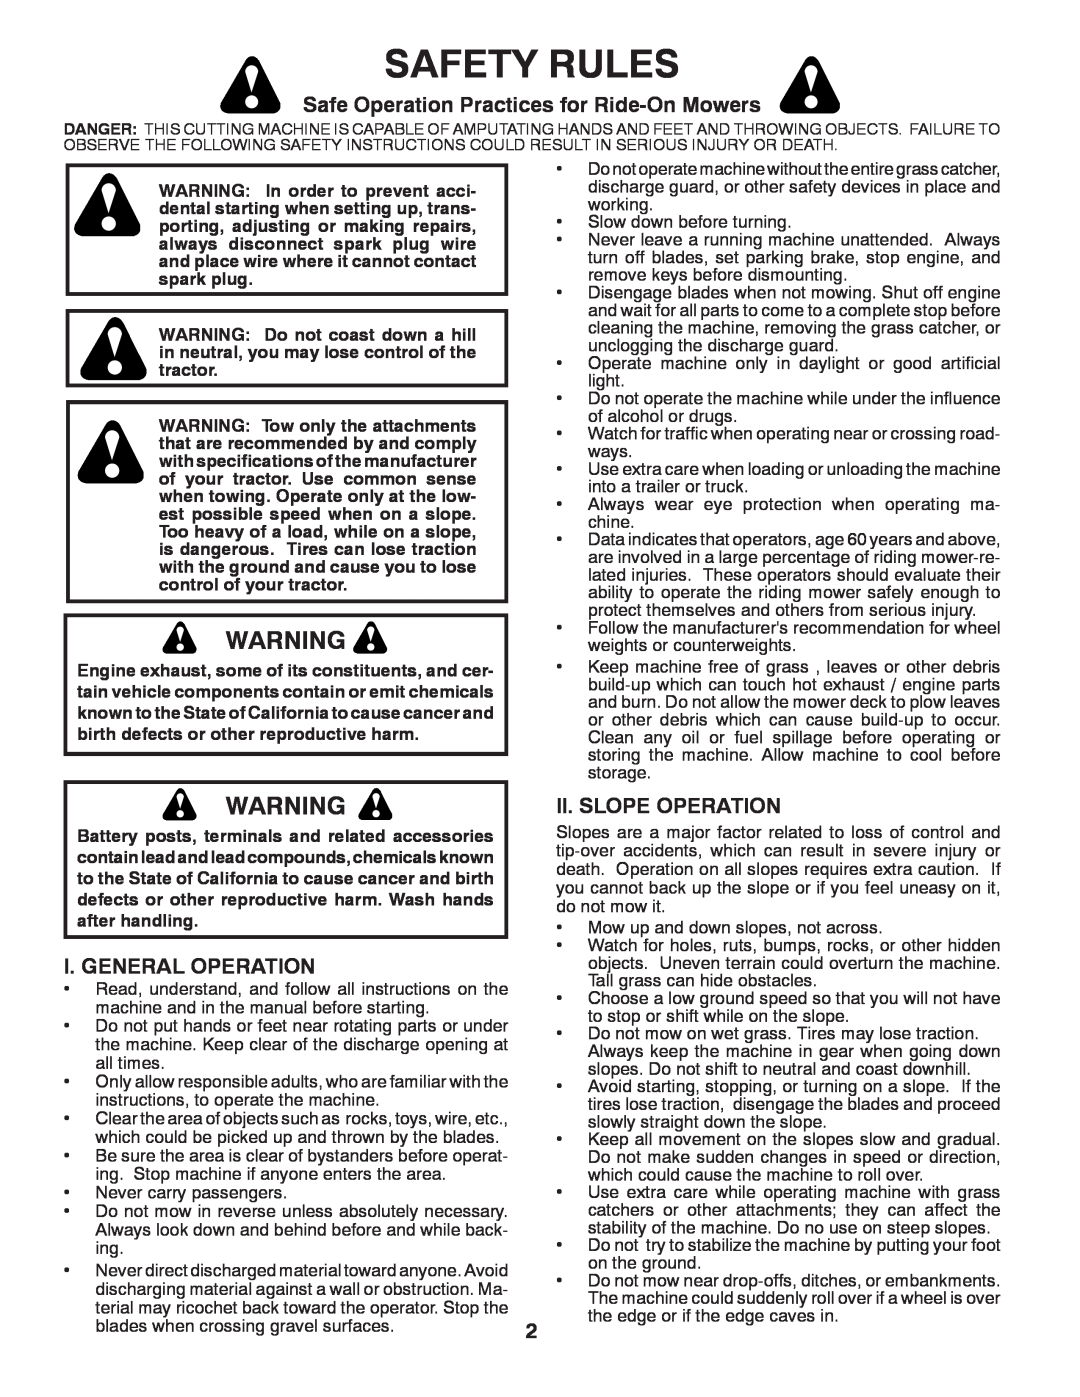 Murray 96017000500 Safety Rules, Safe Operation Practices for Ride-On Mowers, I. General Operation, Ii. Slope Operation 